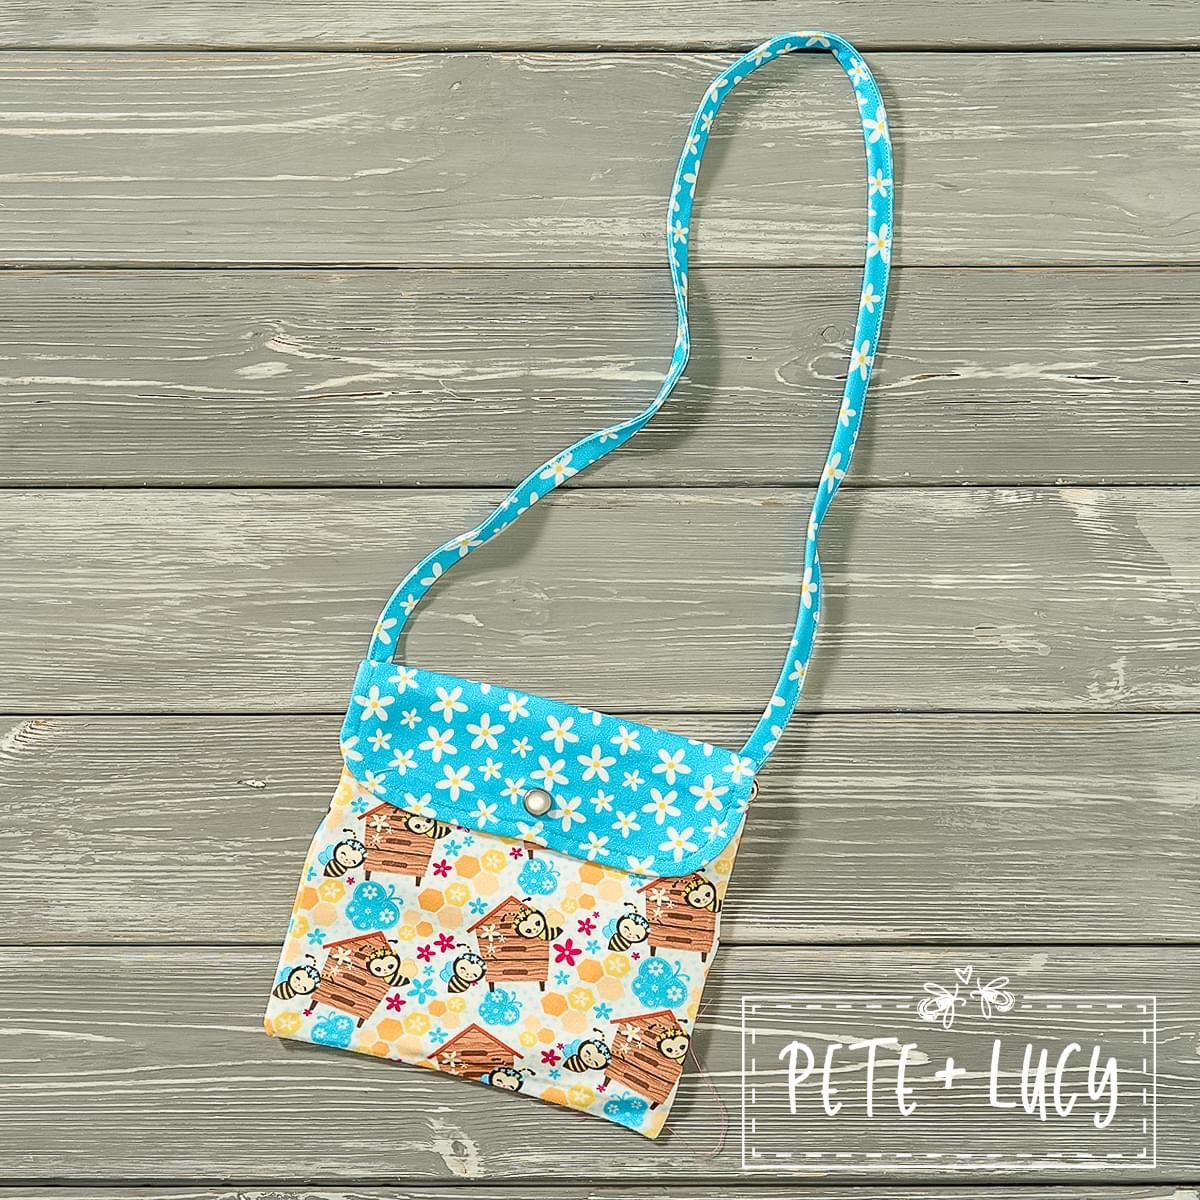 Bee Happy Purse by Pete and Lucy